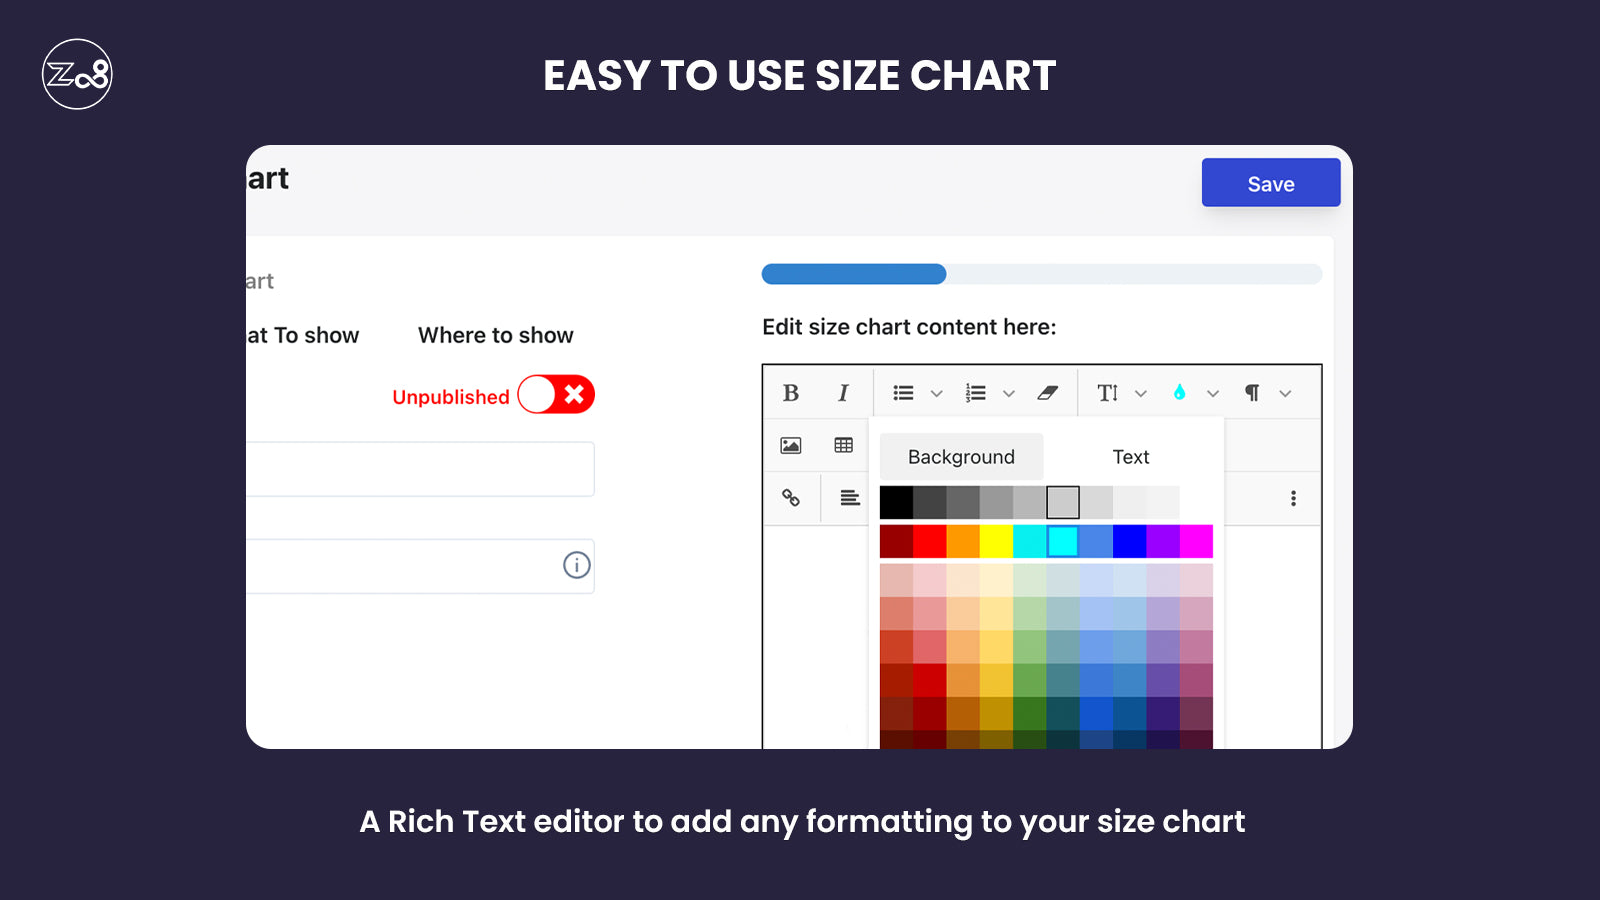 Z08 Size chart app - Multiple customizations for size chart